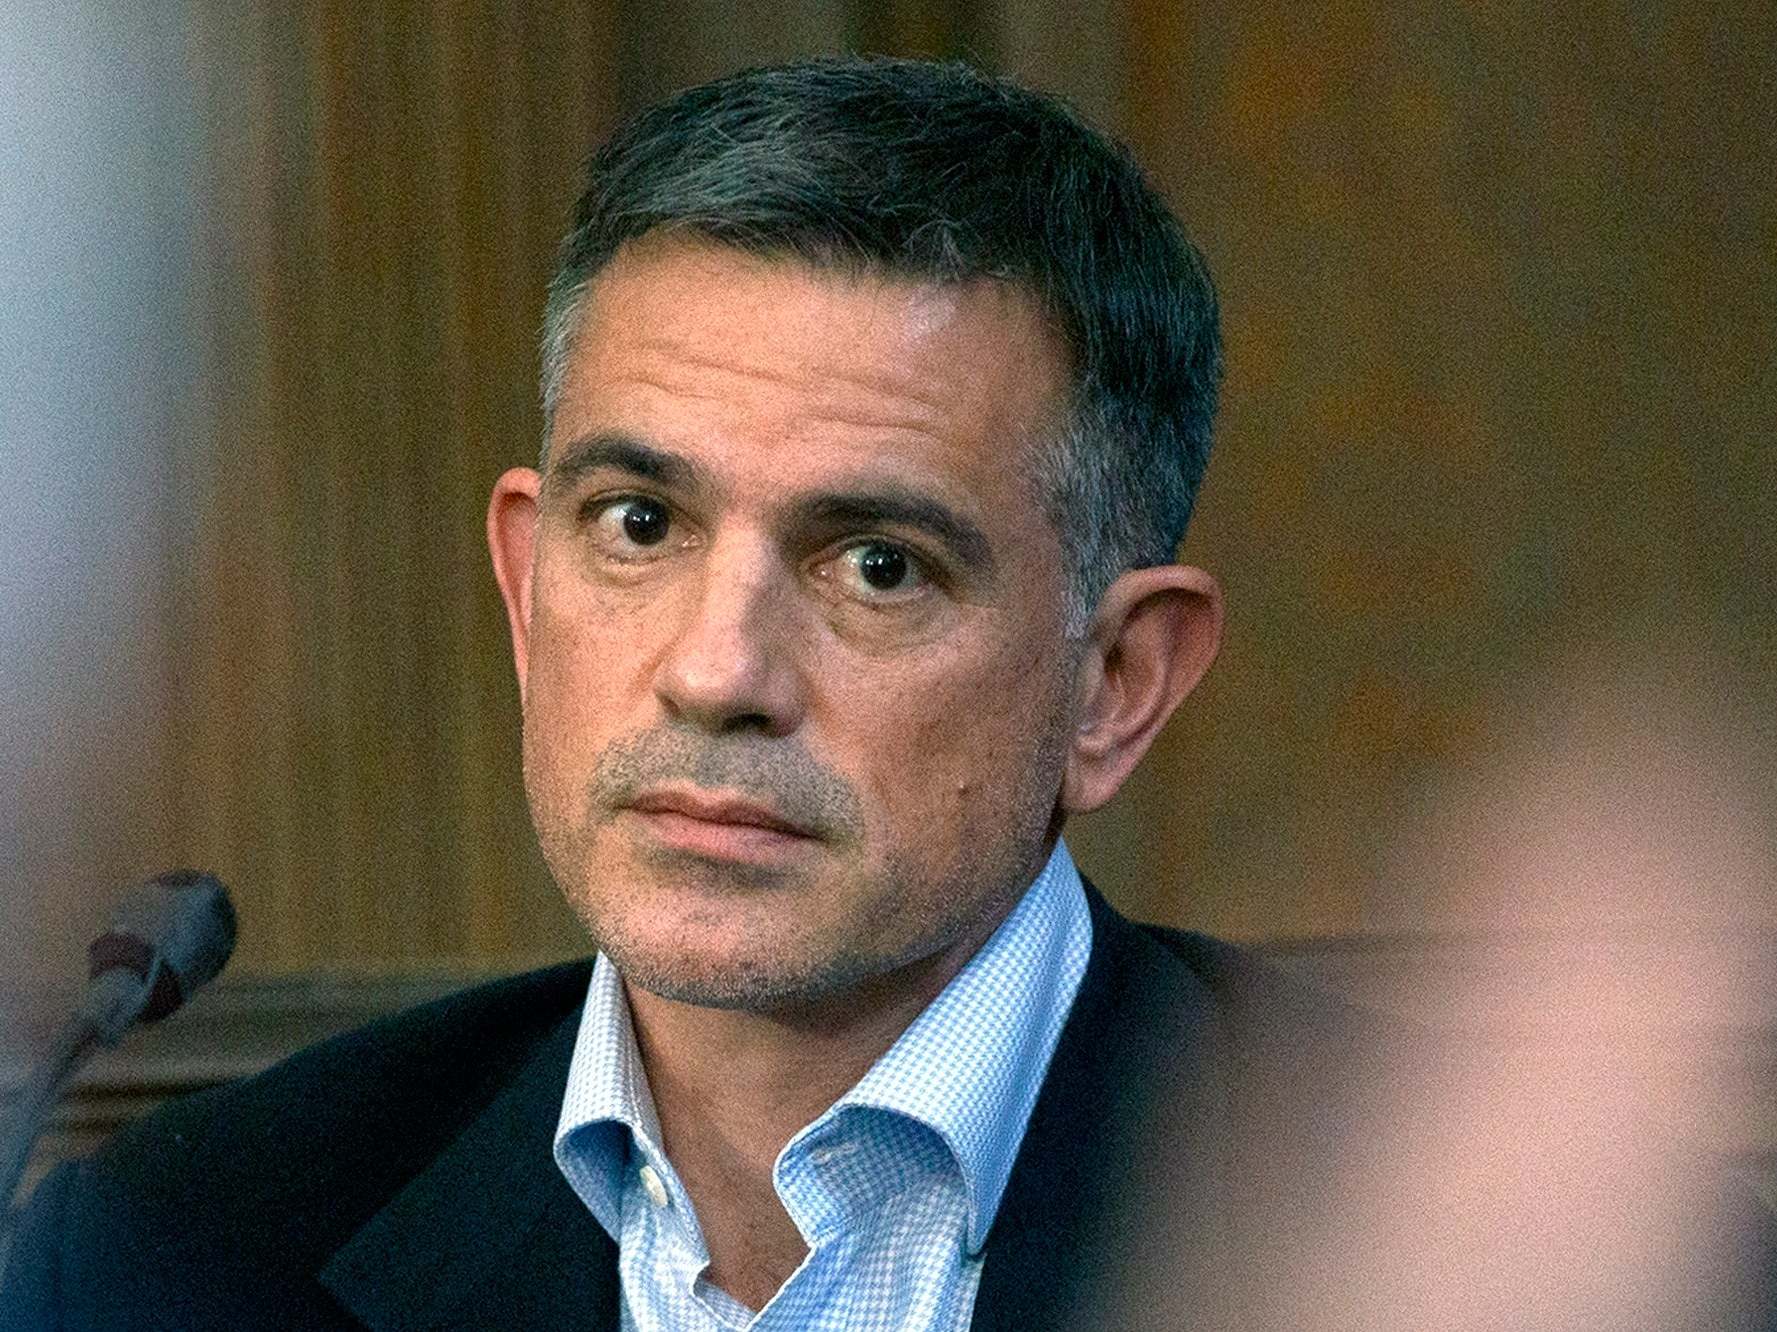 Lauren Almeida described Fotis Dulos (pictured in 2019) to the jury as someone she believed to be, at the time, a ‘role model’ and considered him to be a ‘mentor’ and a ‘friend’